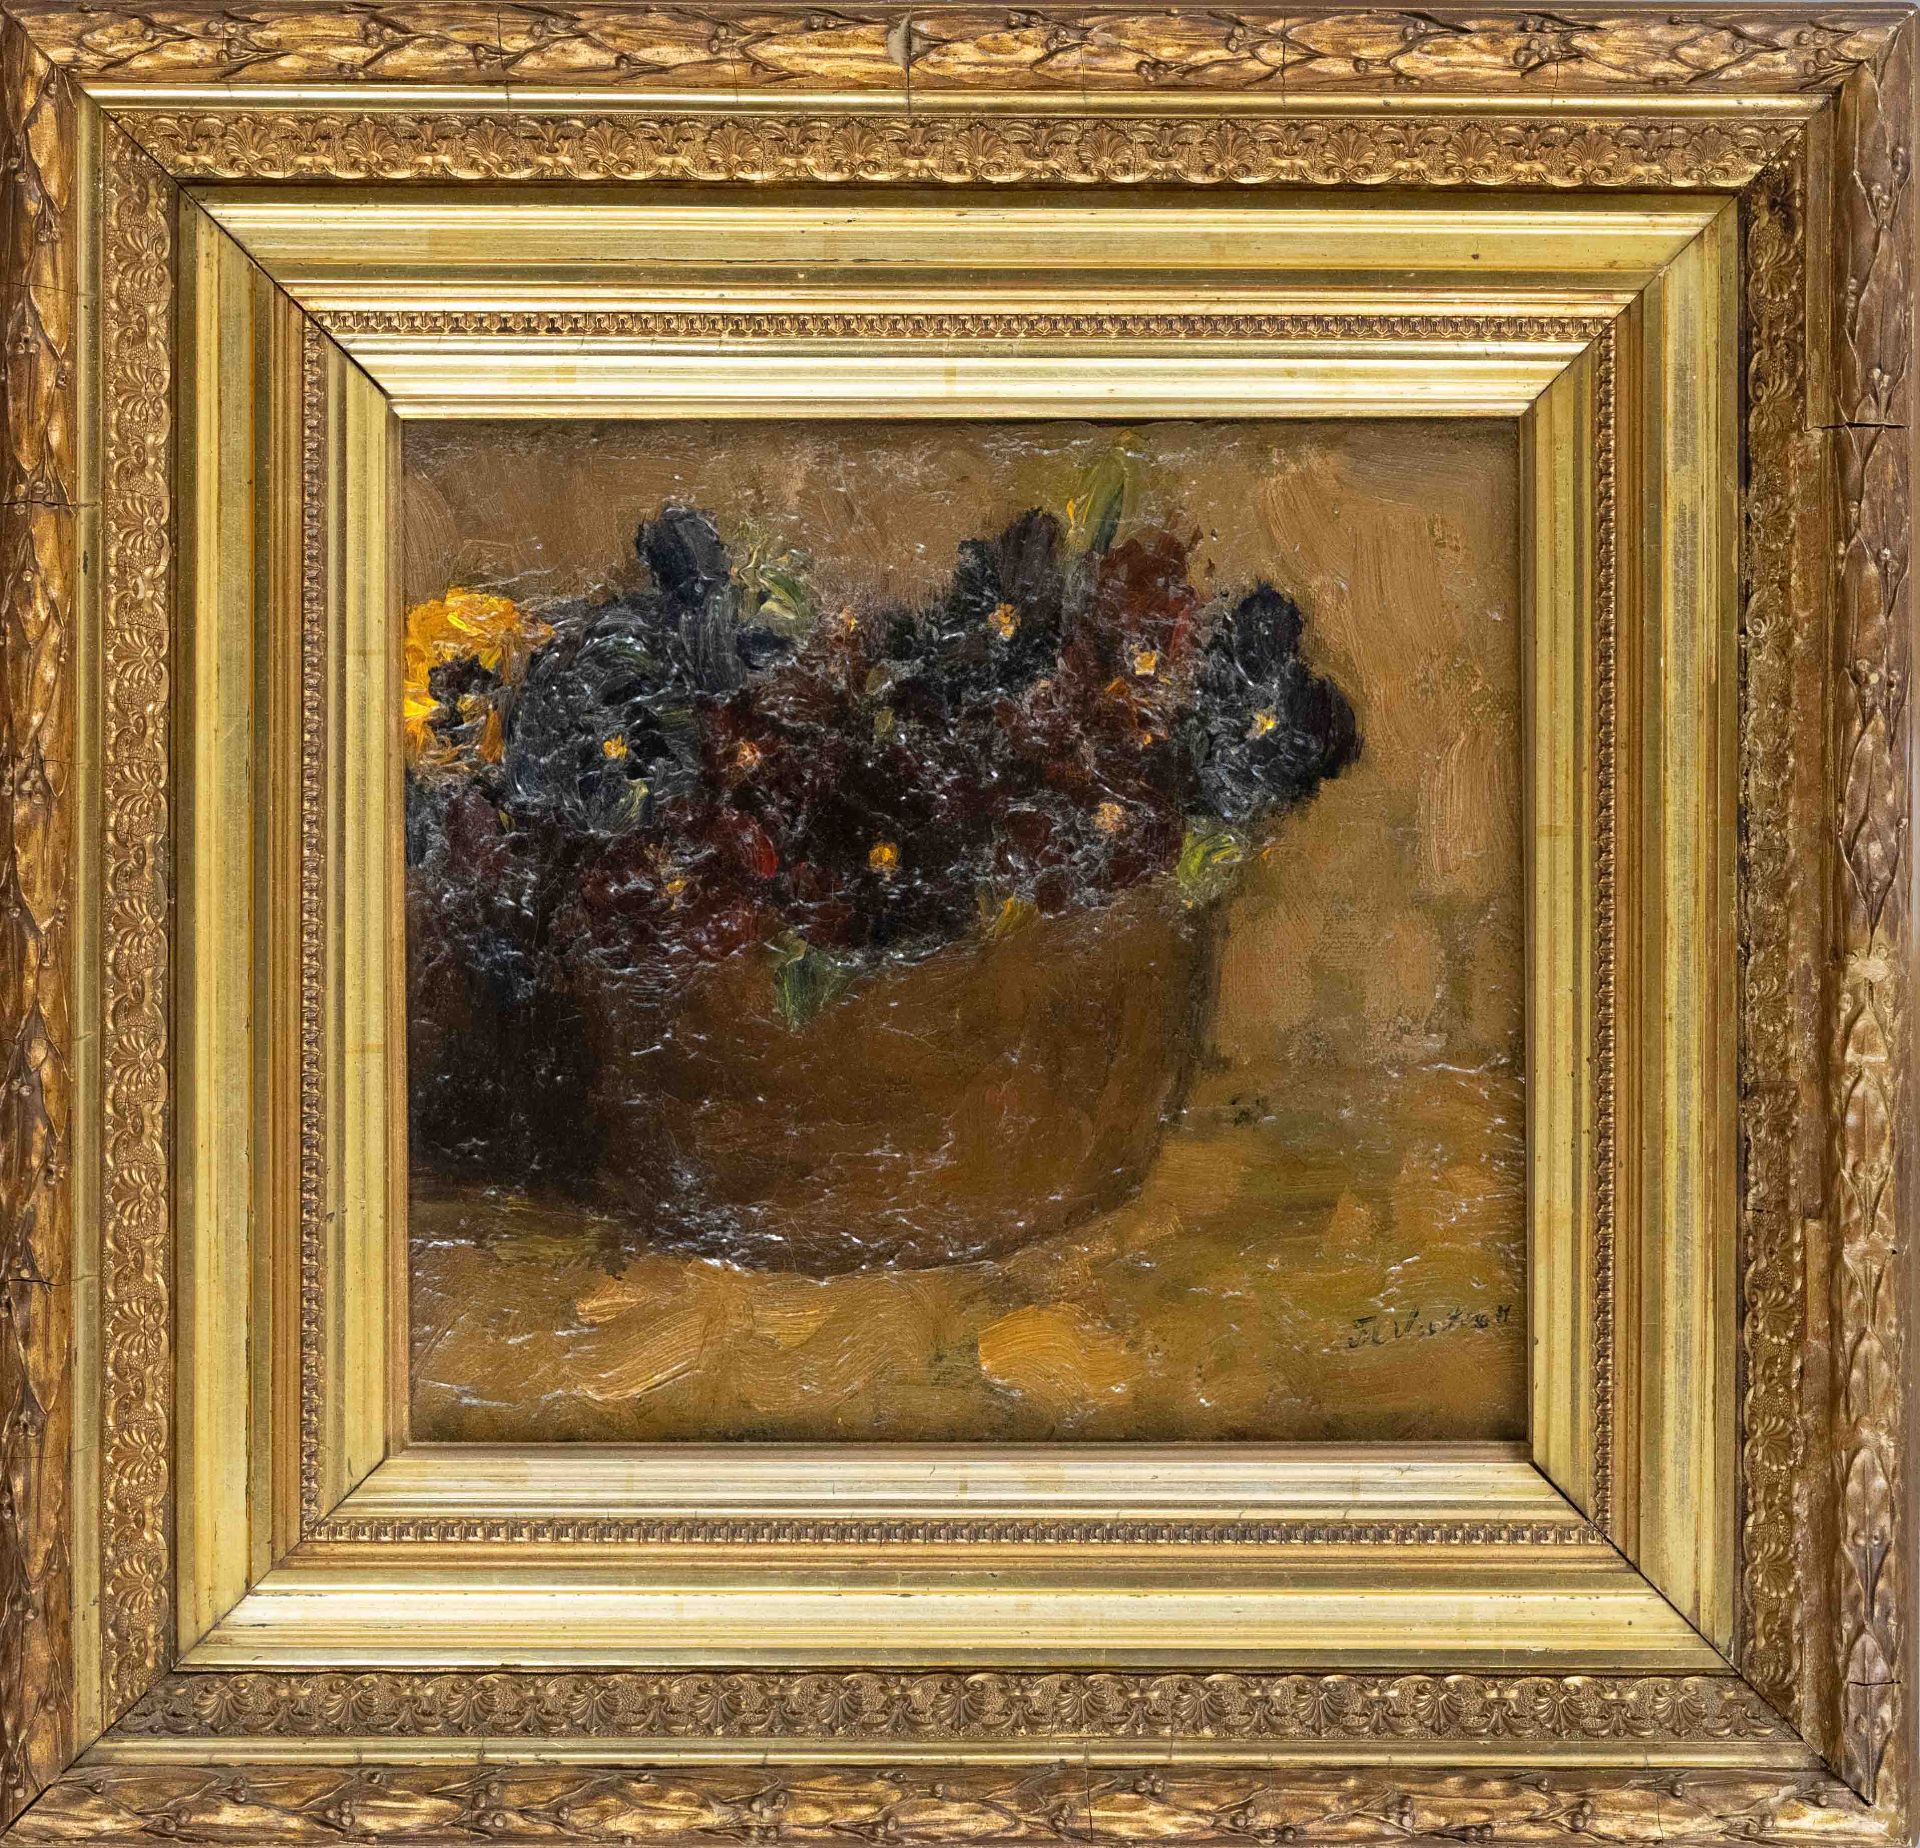 Unidentified painter late 19th c., Flower basket, impressionistic still life in oil on canvas,